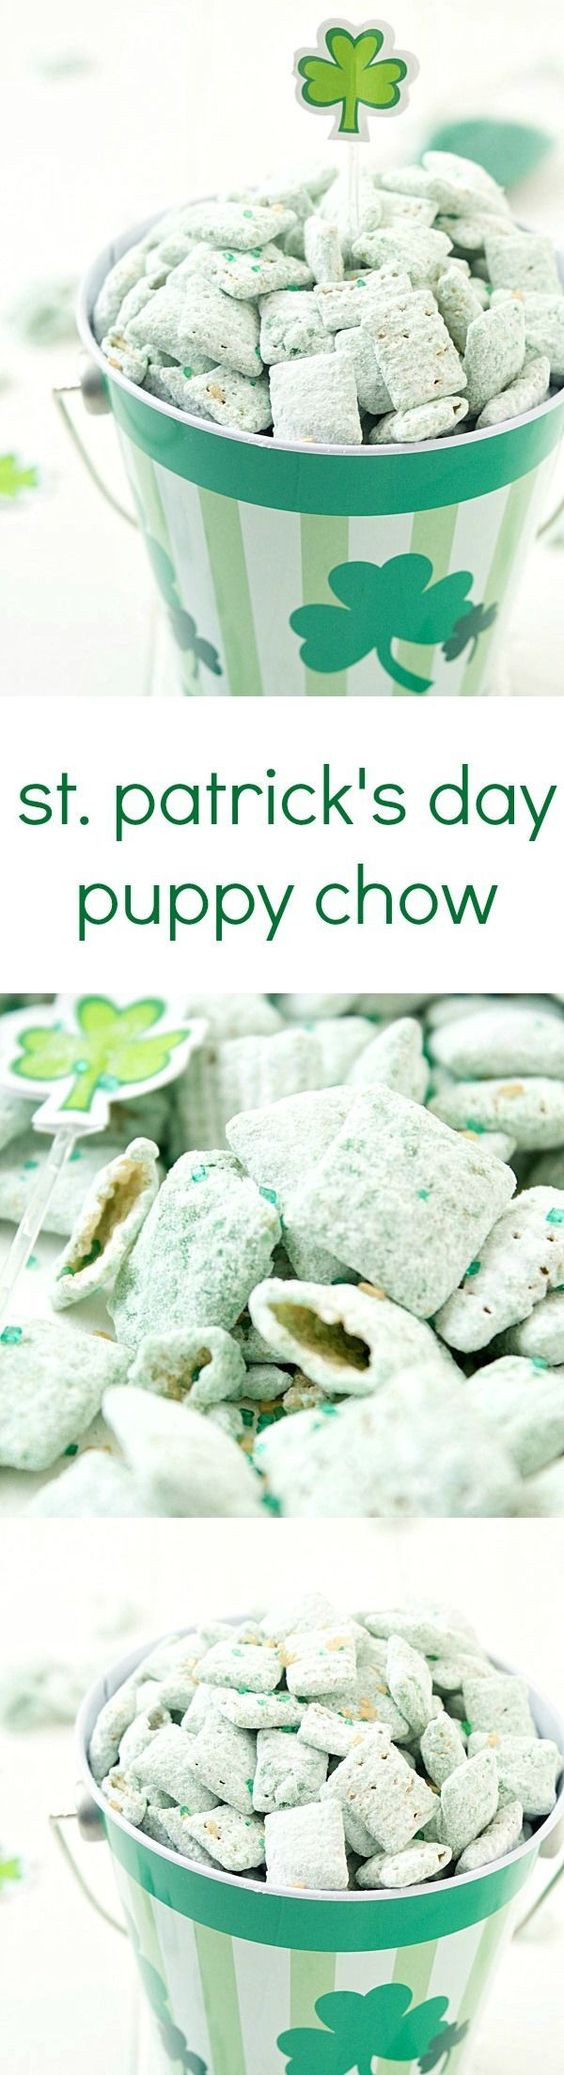 St Patrick's Day Food Ideas
 The BEST Easy St Patrick’s Day Desserts and Treats